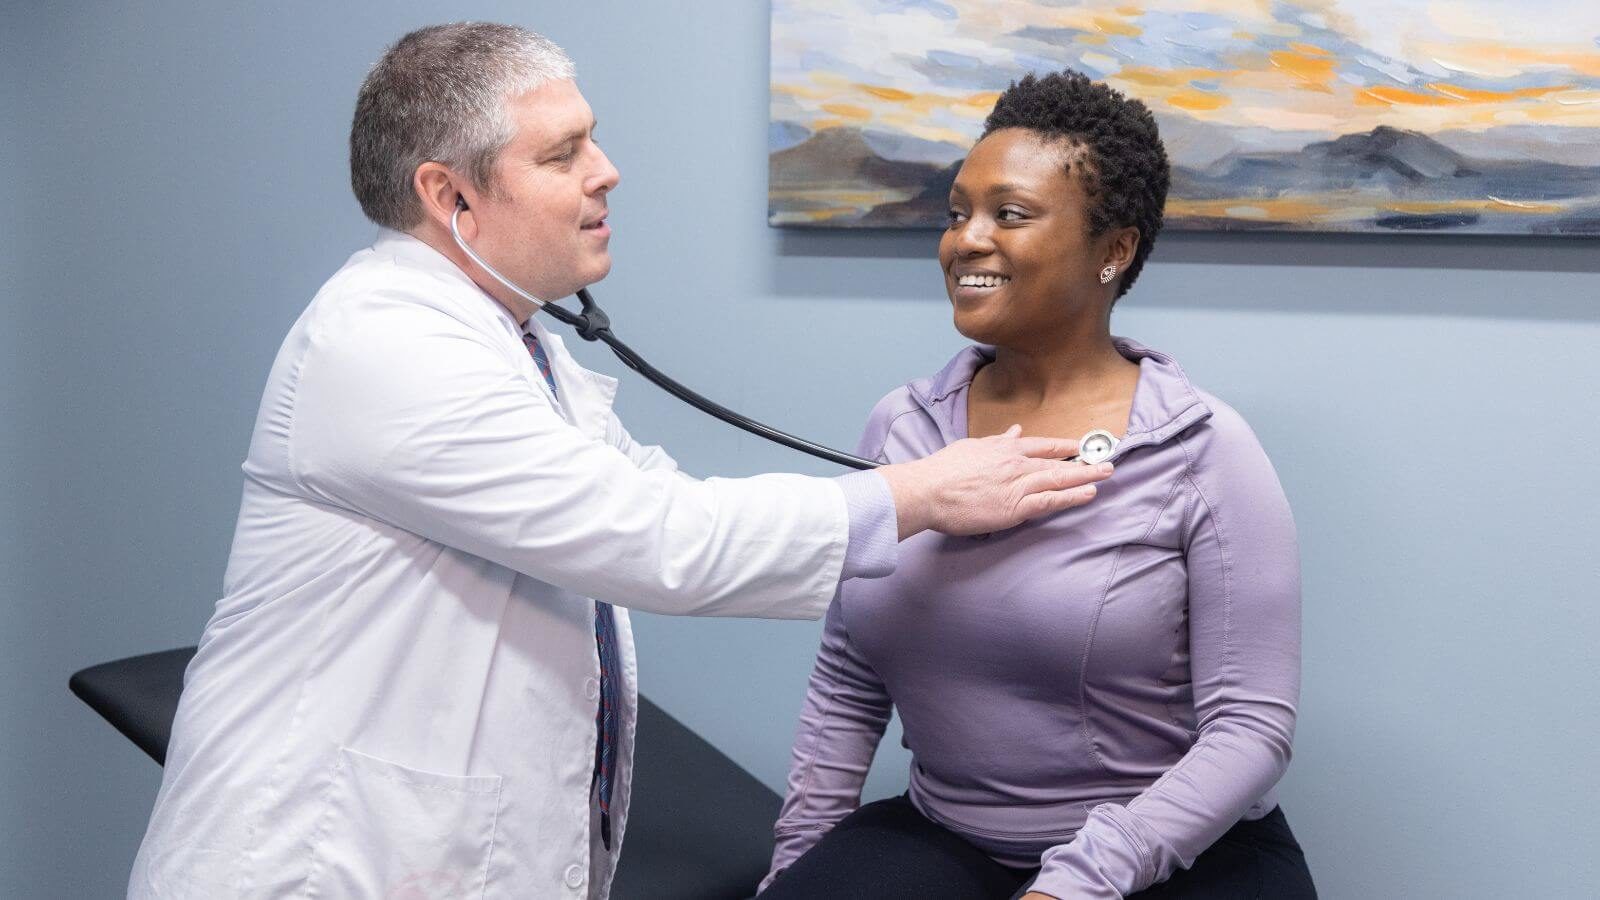 A Clinician examining a smiling female client at Sandstone Care Virginia Detox Center